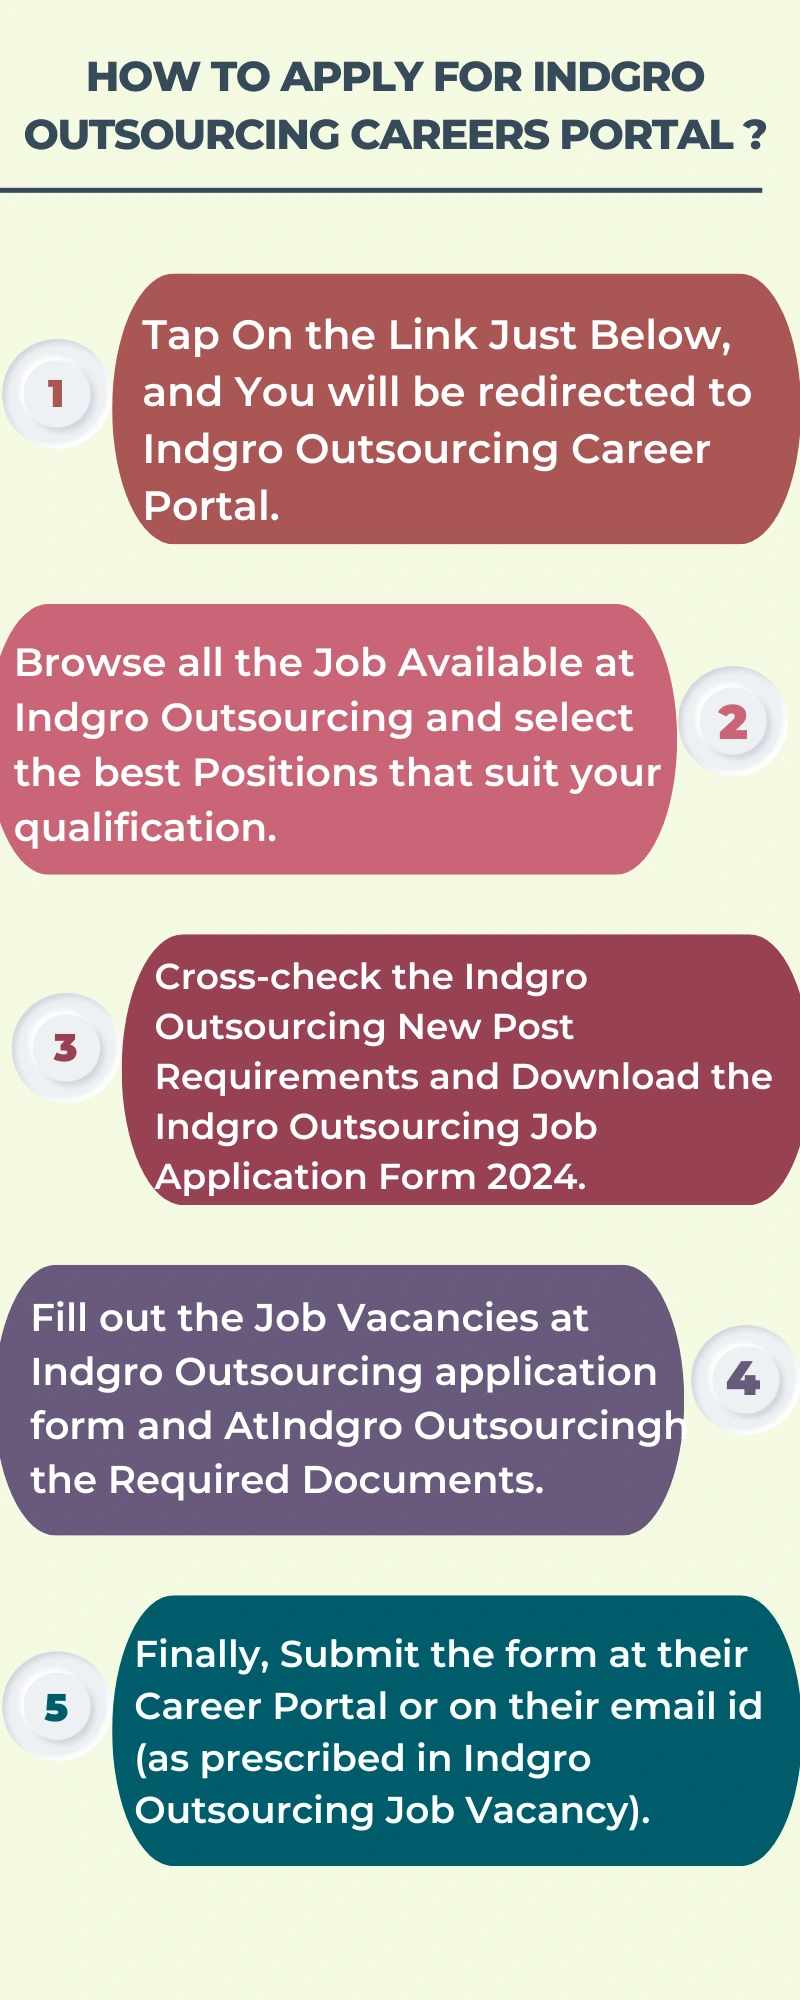 How To Apply for Indgro Outsourcing Careers Portal ?